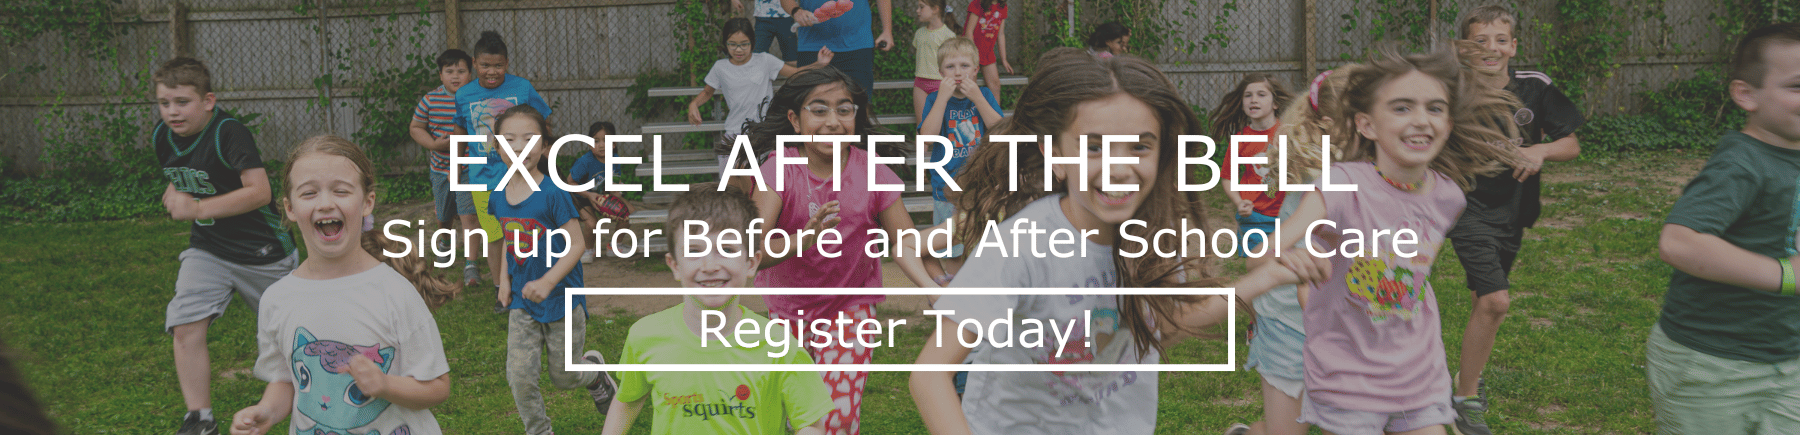 Banner saying "Excel After the Bell. Sign up for Before and After School Care" with a button linking to registration saying "Register Today!"